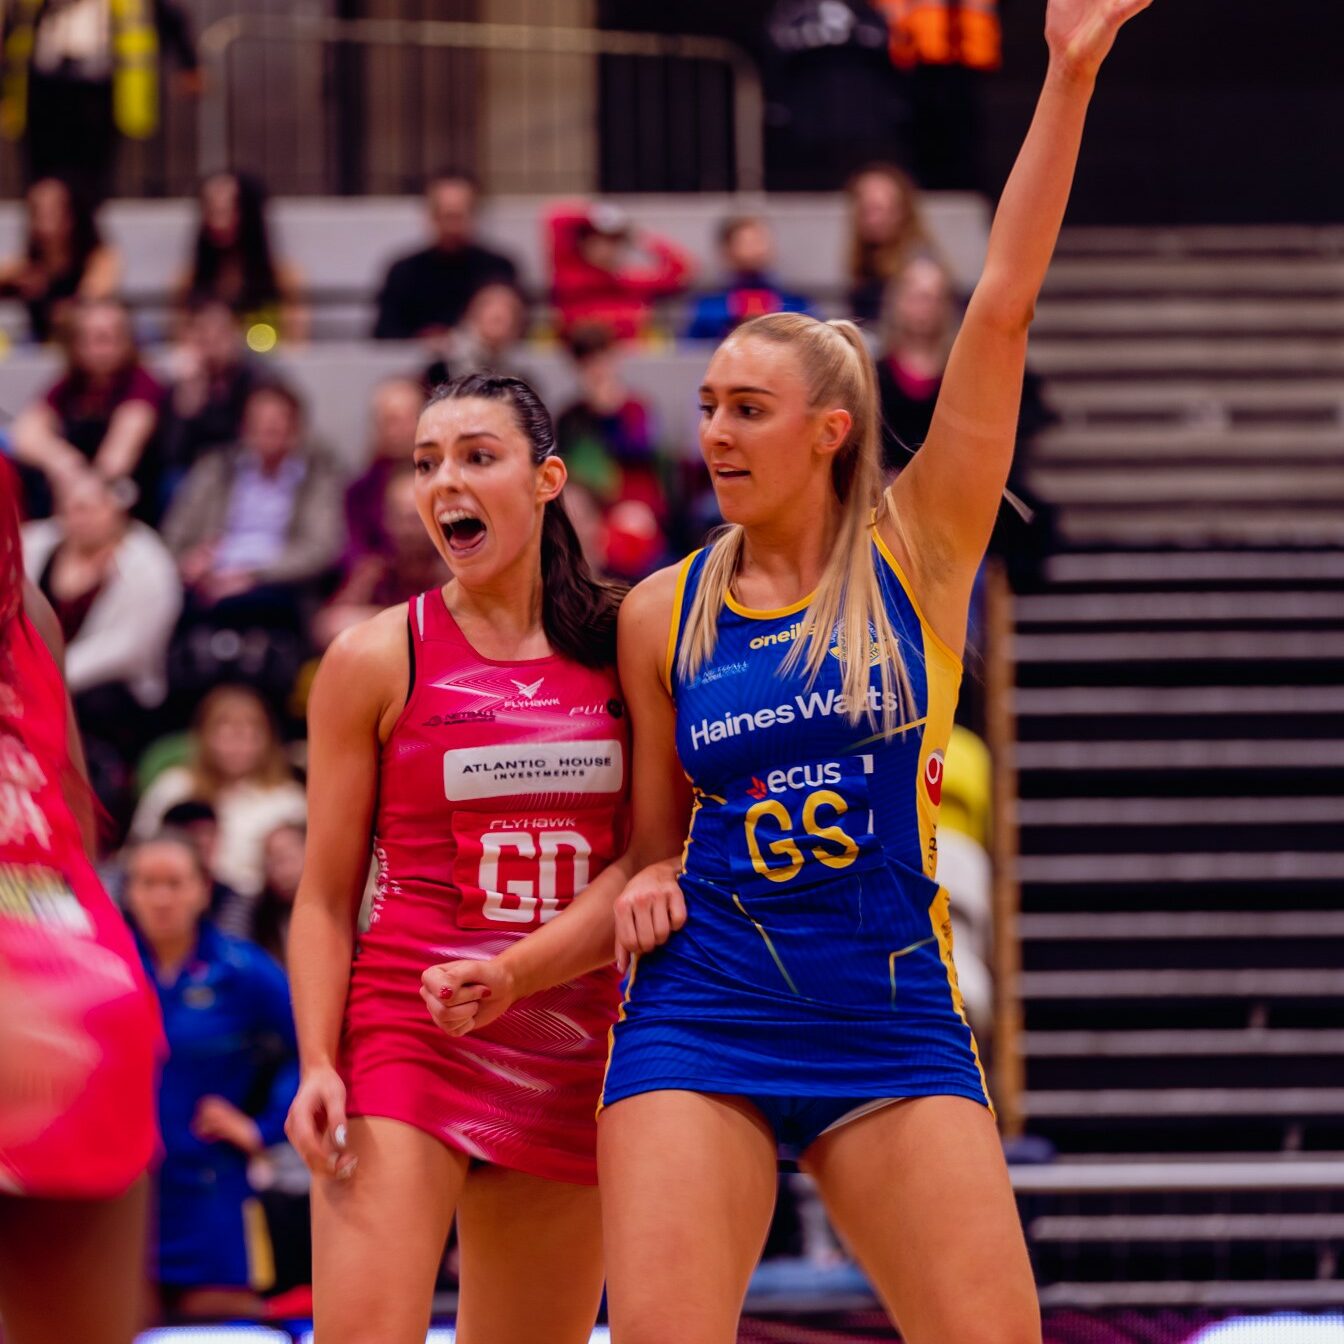 Taken during the Netball Super League game between London Pulse and Team Bath Netball at the Copper Box Arena, London, England on 17th January 2023.